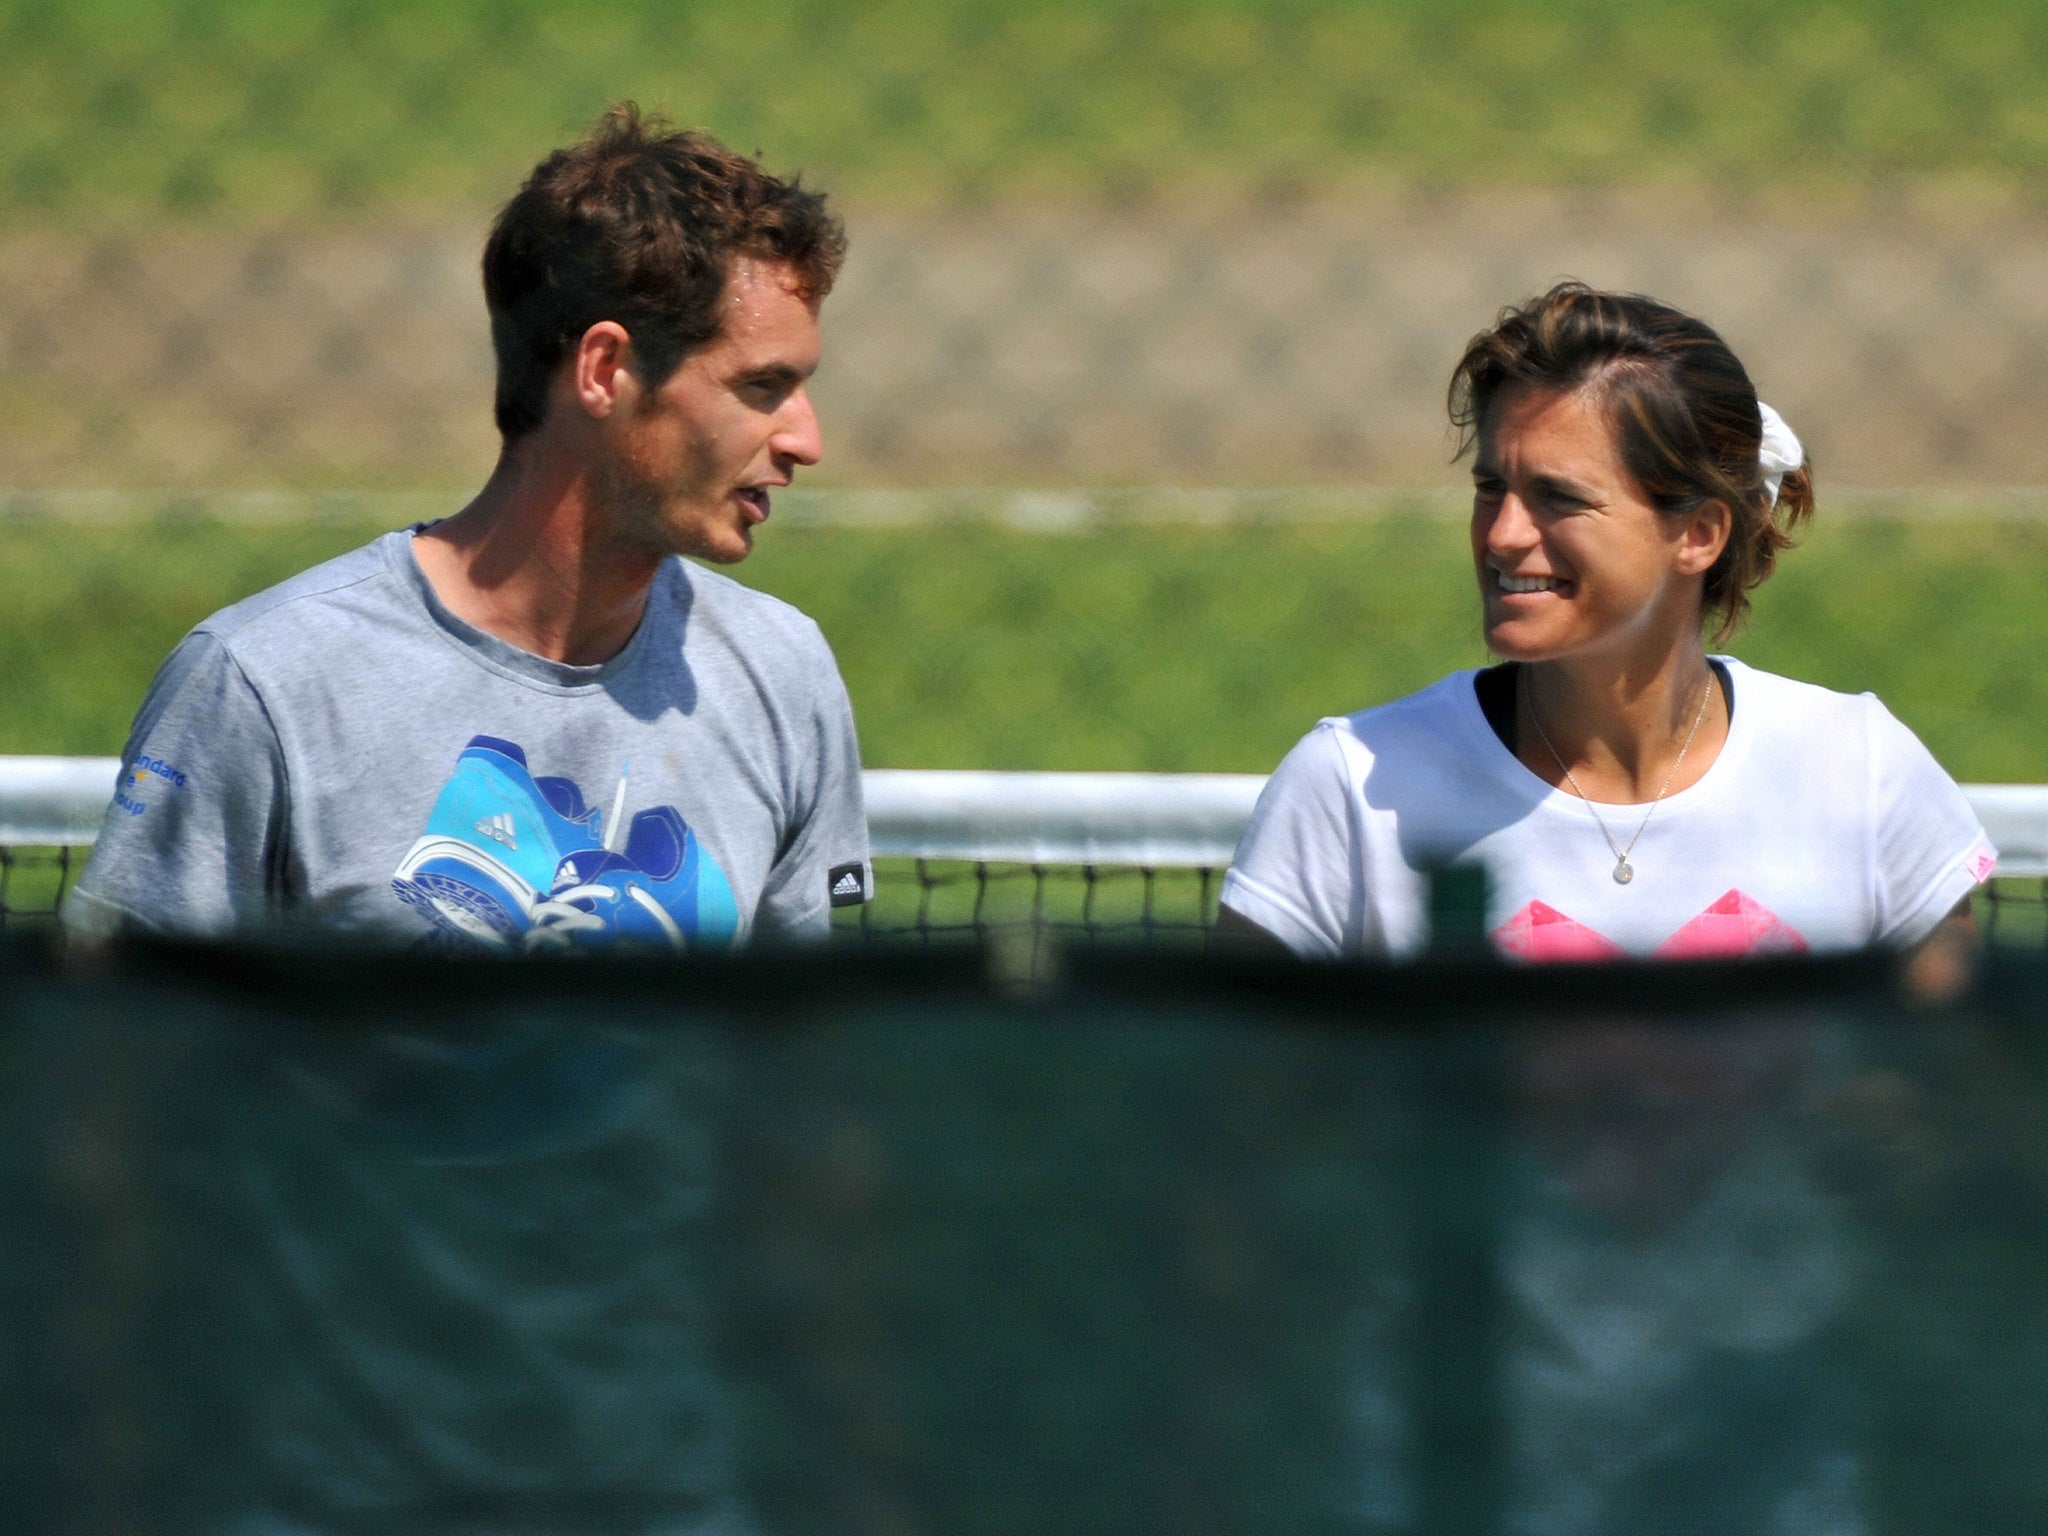 Murray became only the second top-10 player in the history of the ATP Tour to have a female coach when he hired Amelie Mauresmo